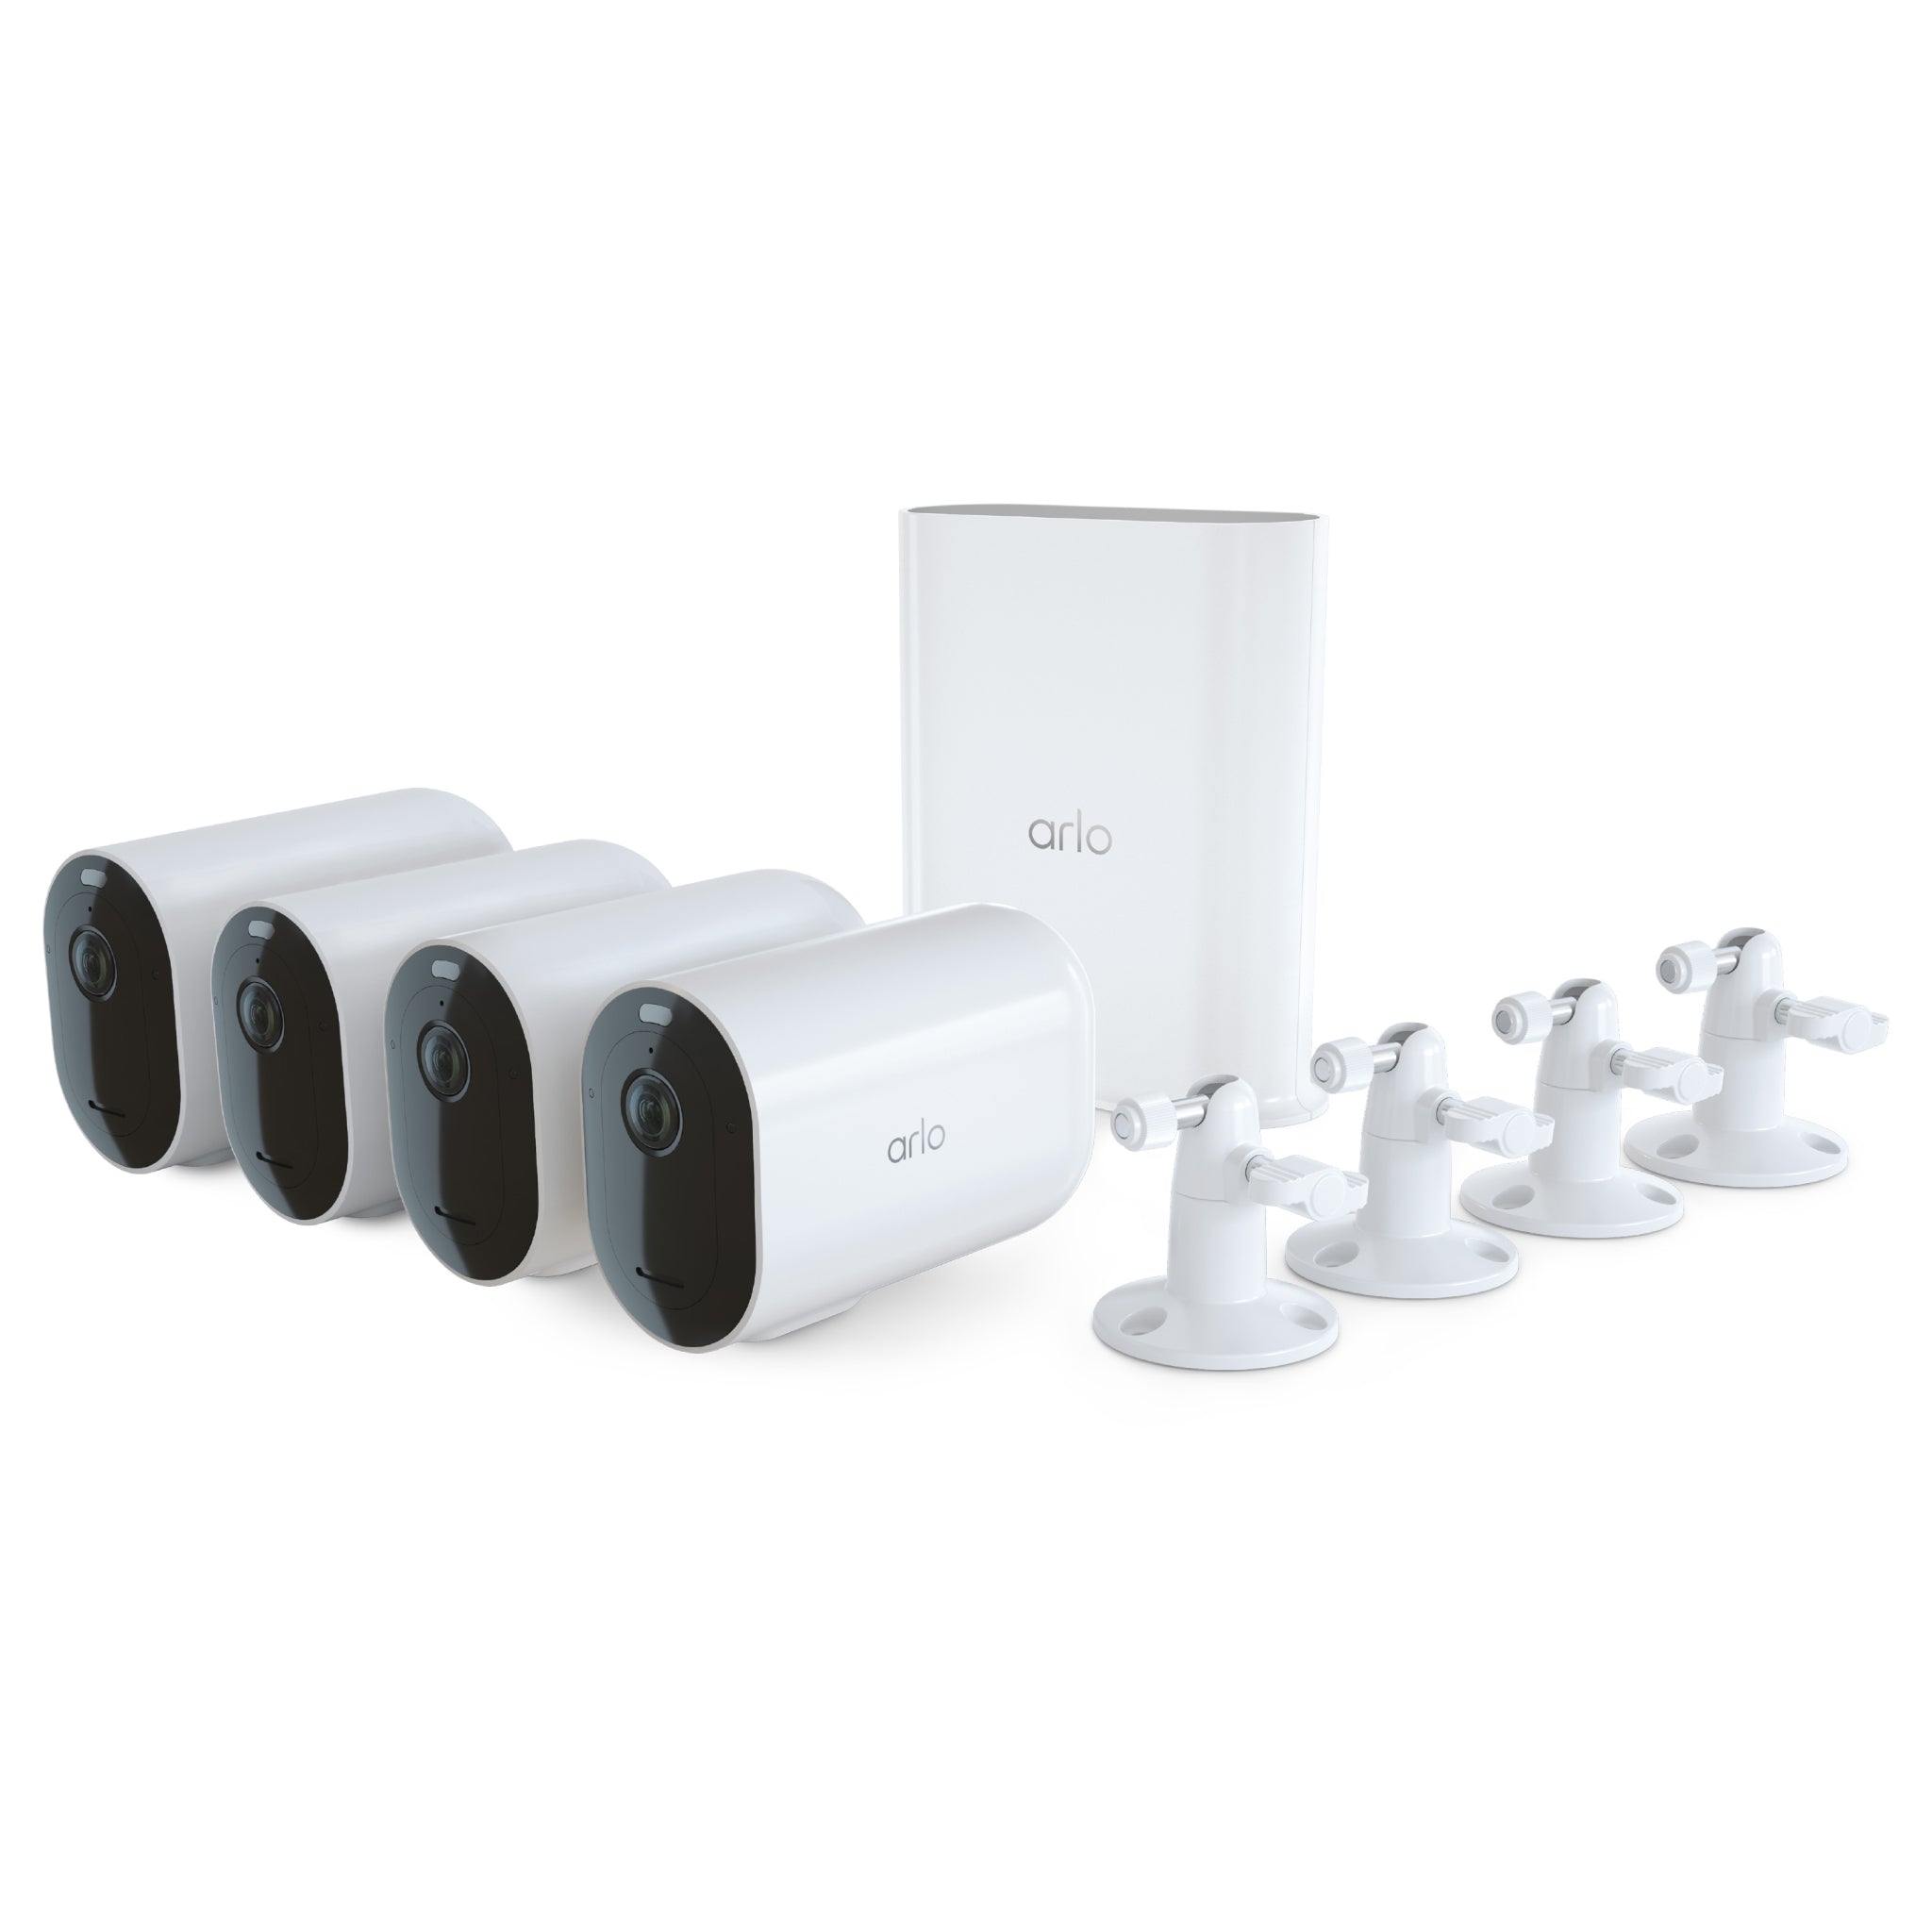 Arlo VMS4452P-100NAR Pro 4 Bundle Includes 4 Cameras with XL Battery and Housing, 4 Security Mounts and SmartHub - Certified Refurbished